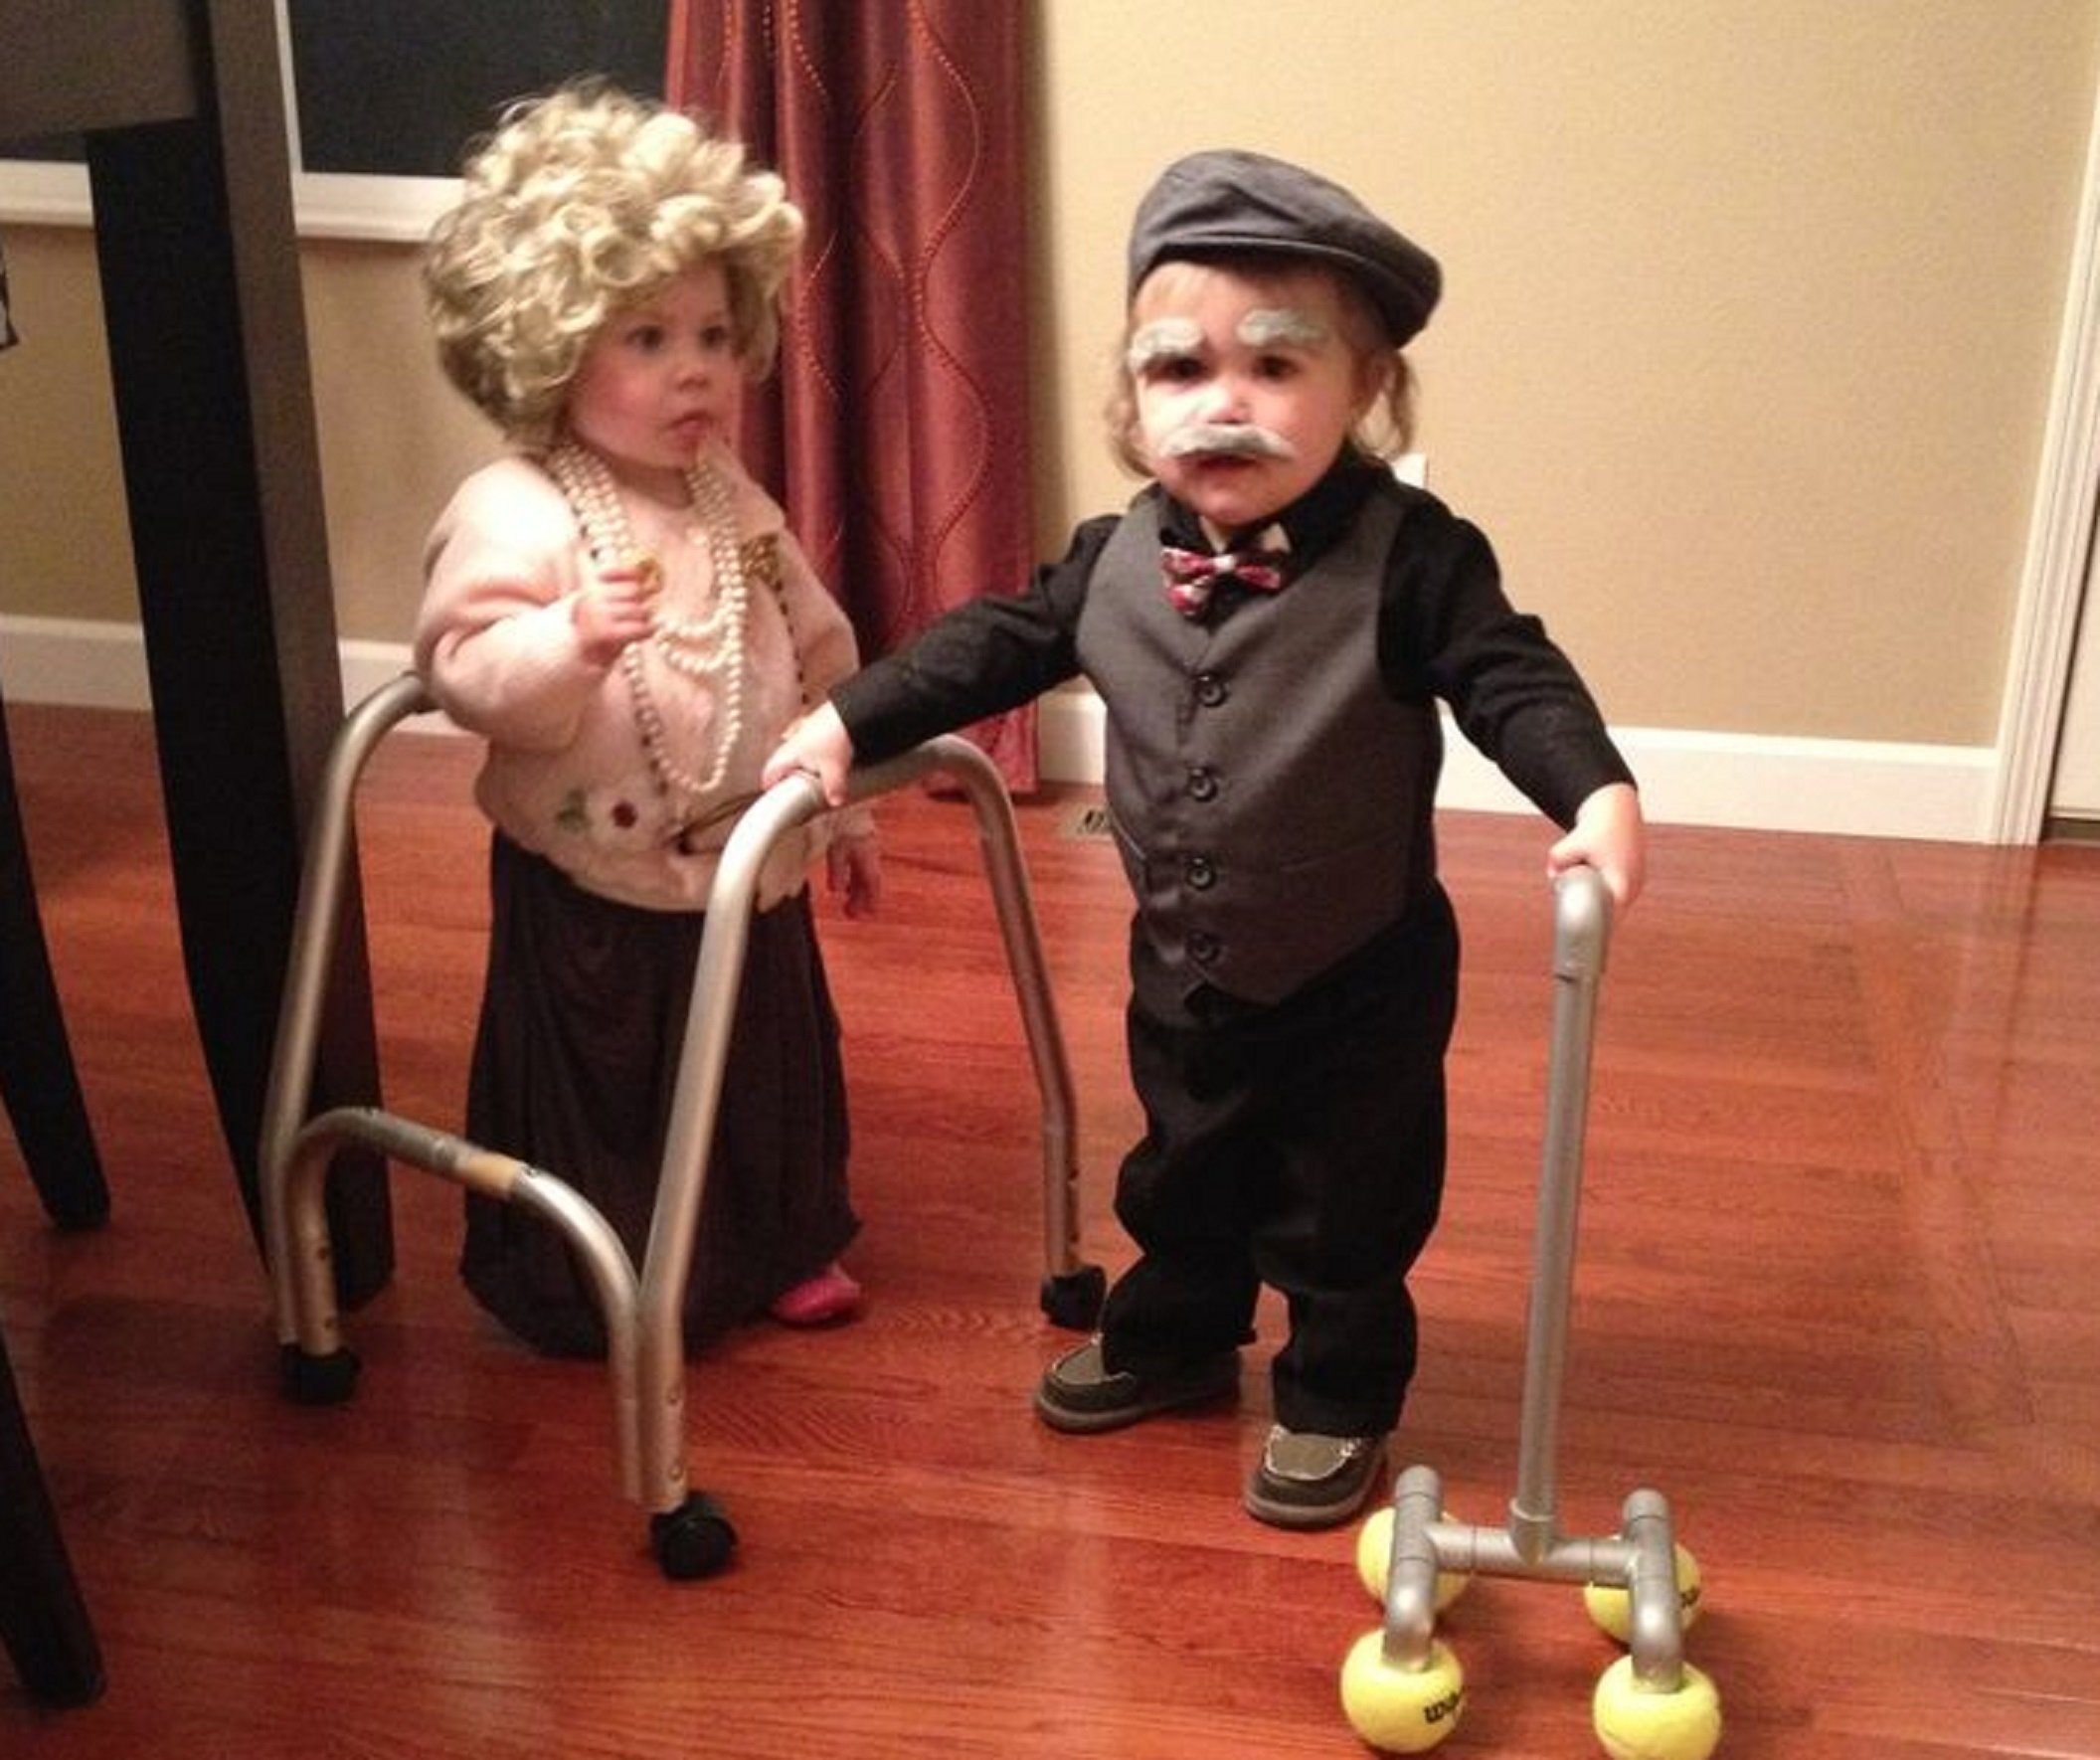 10 Lovely His And Hers Halloween Costume Ideas 2014 couples halloween costumes 1 2023